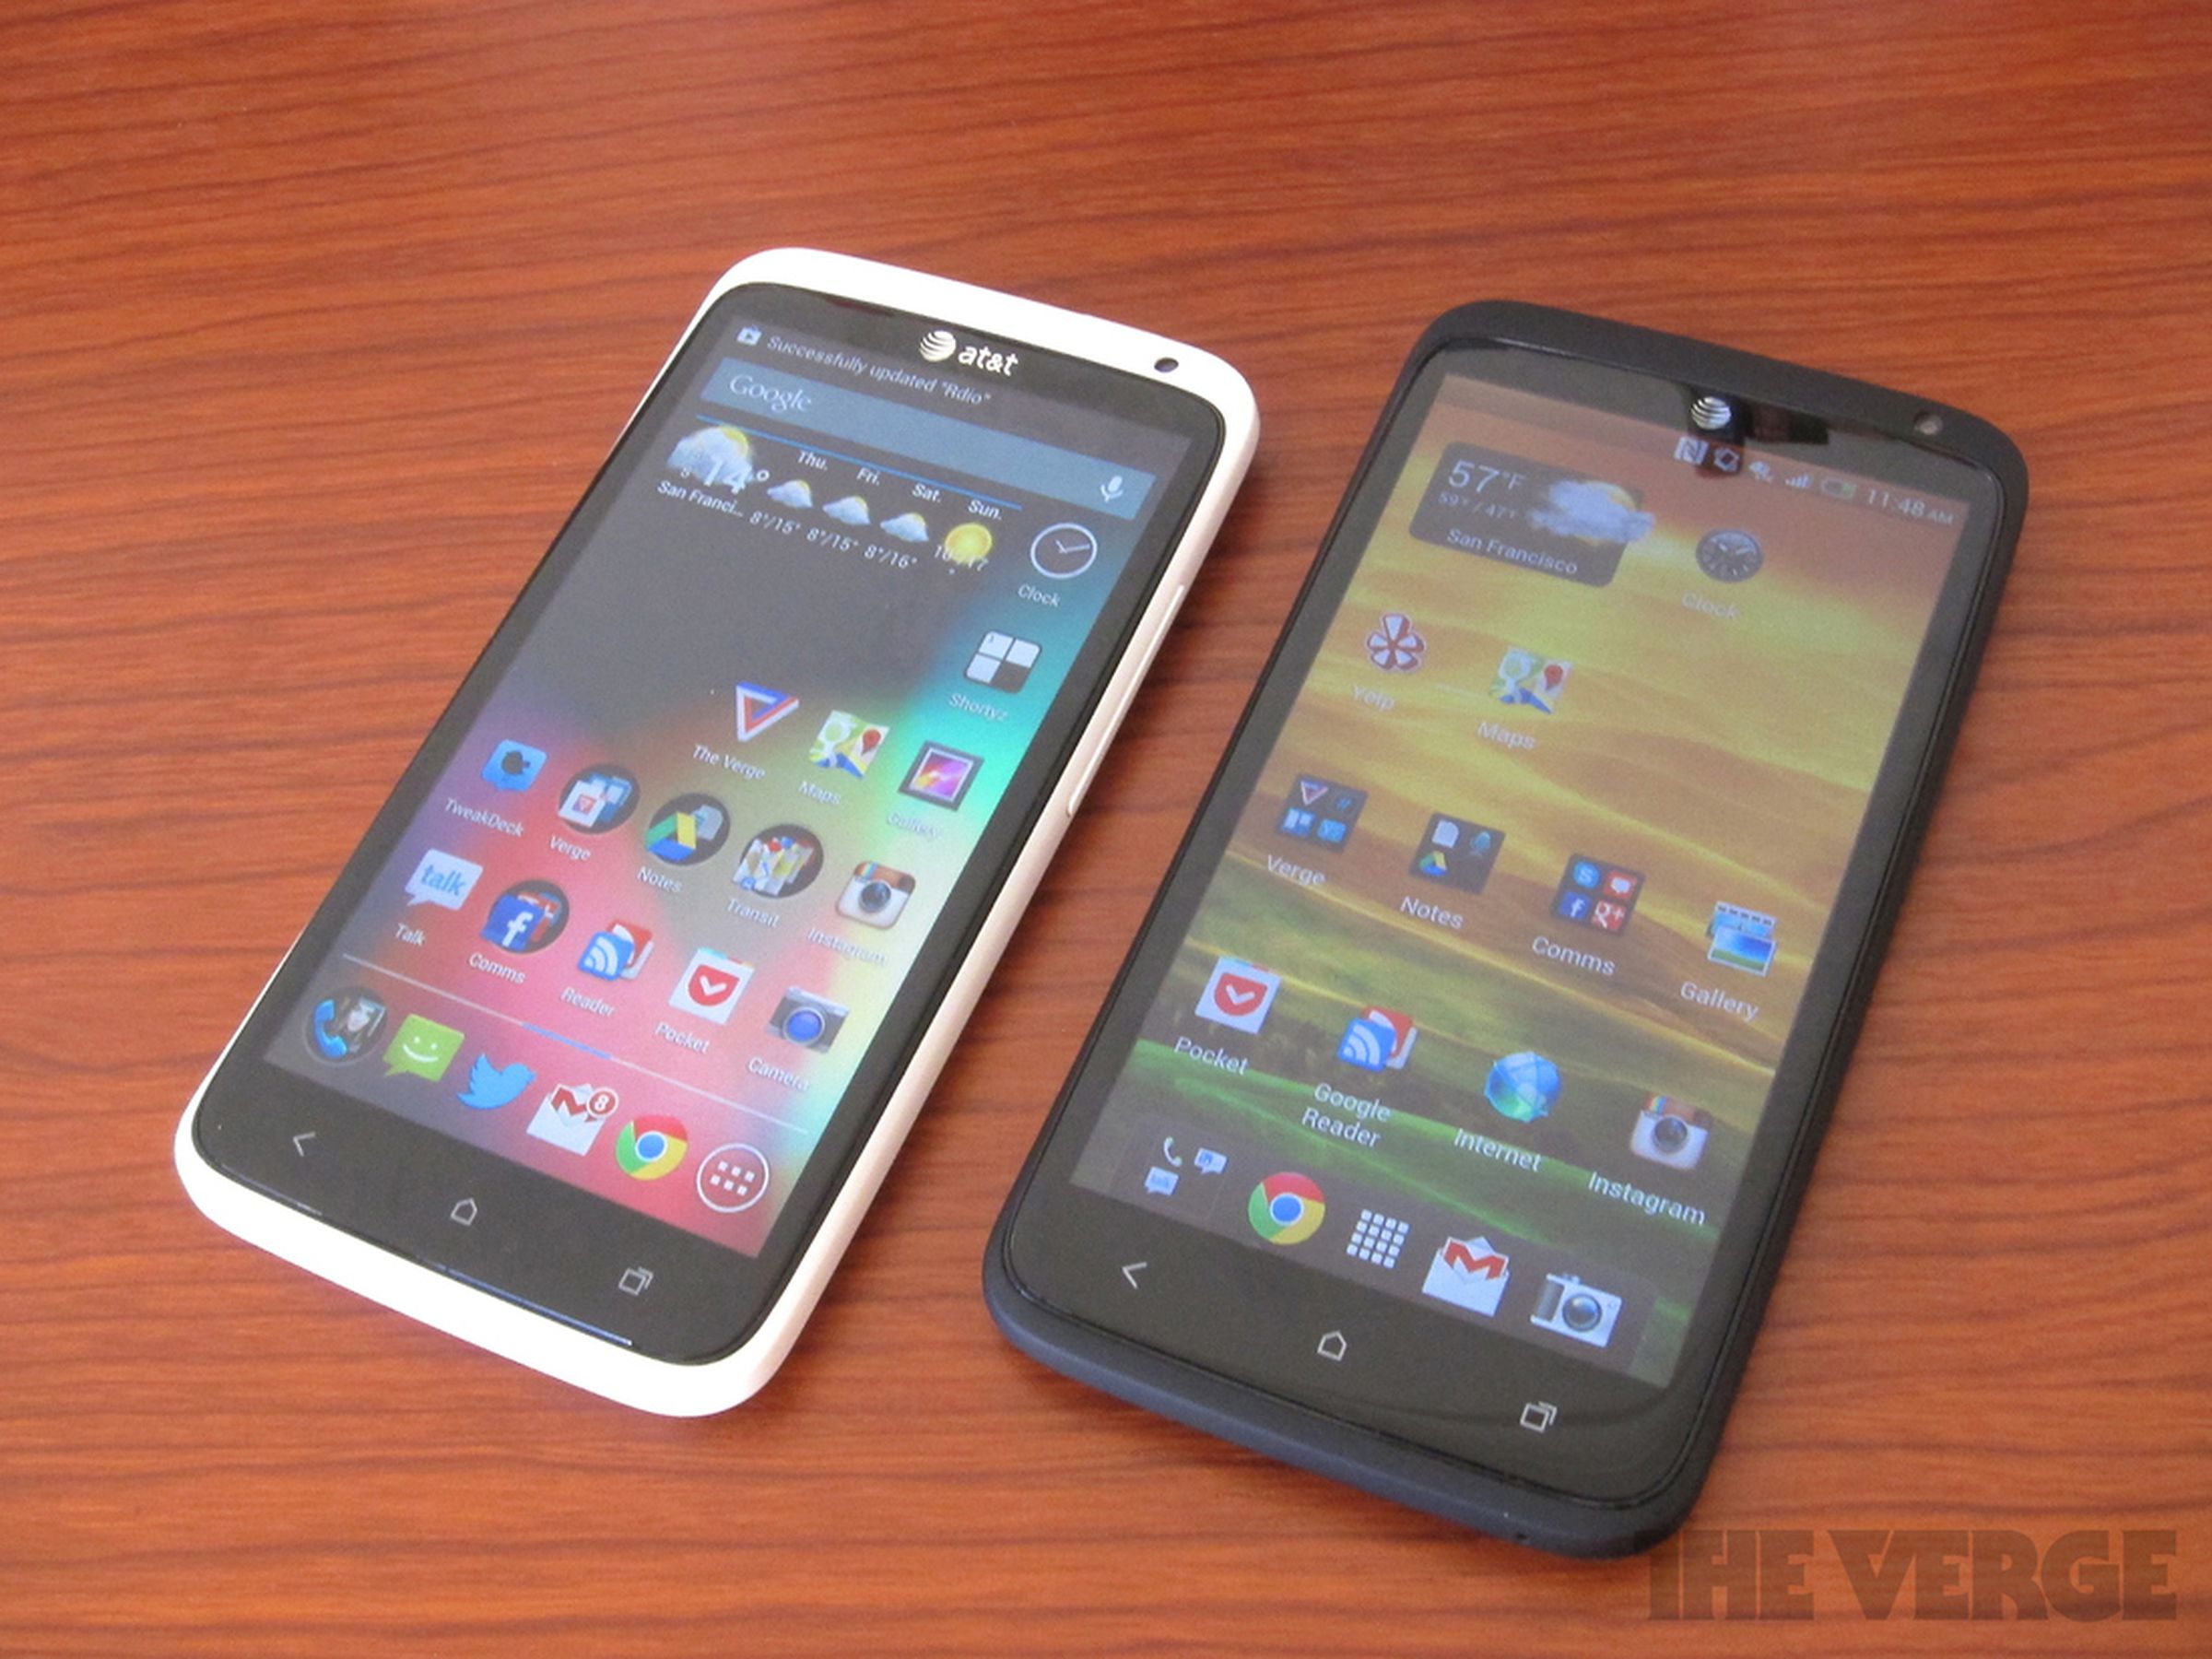 HTC One X+ hands-on review photos